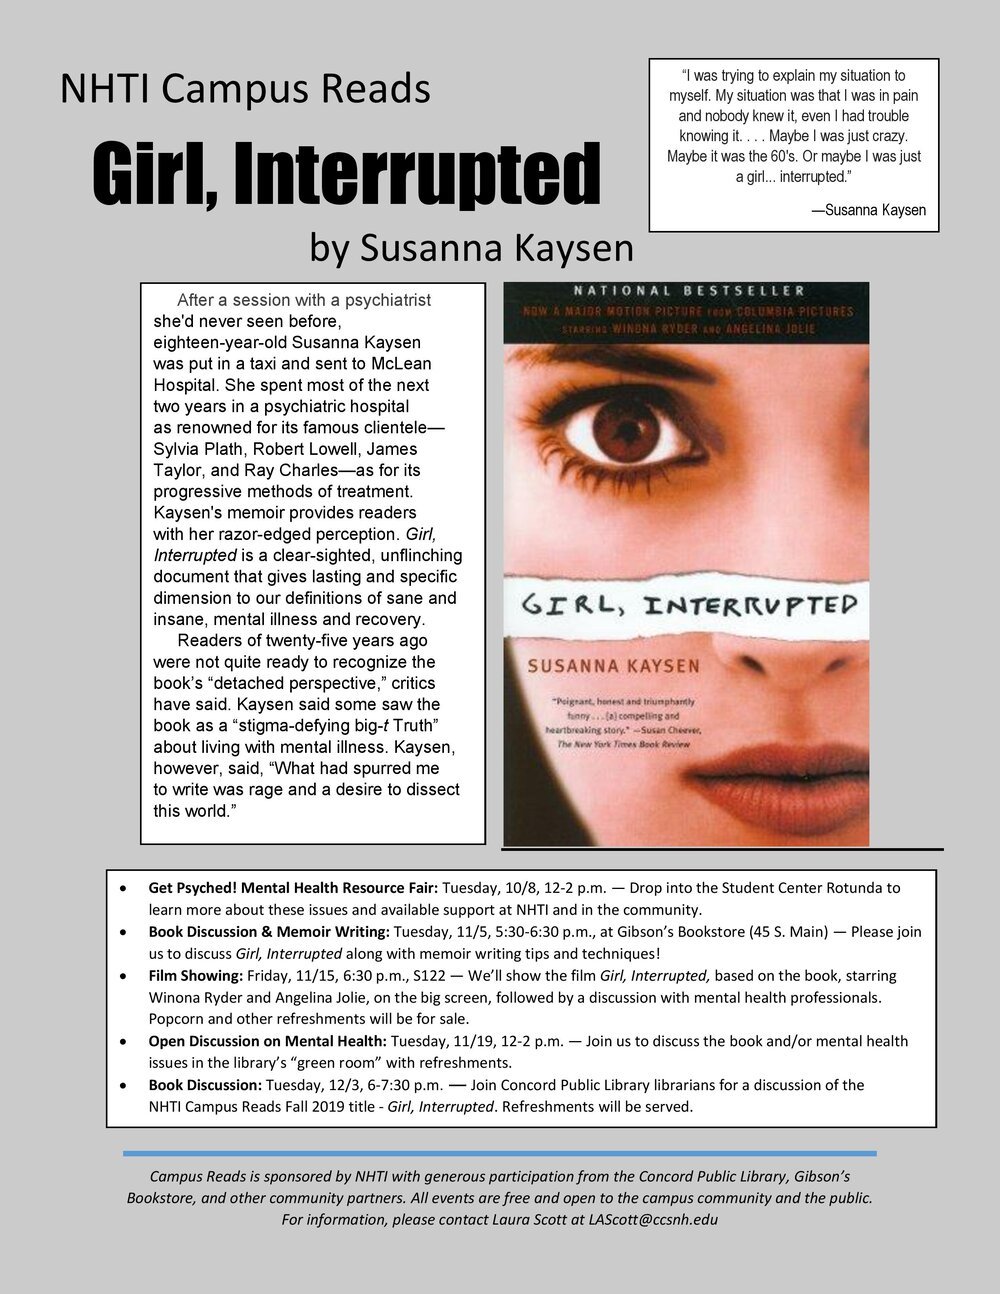 NHTI+Campus+Reads+Girl+Interrupted+Fall+2019+final+-page-001+(1).jpg